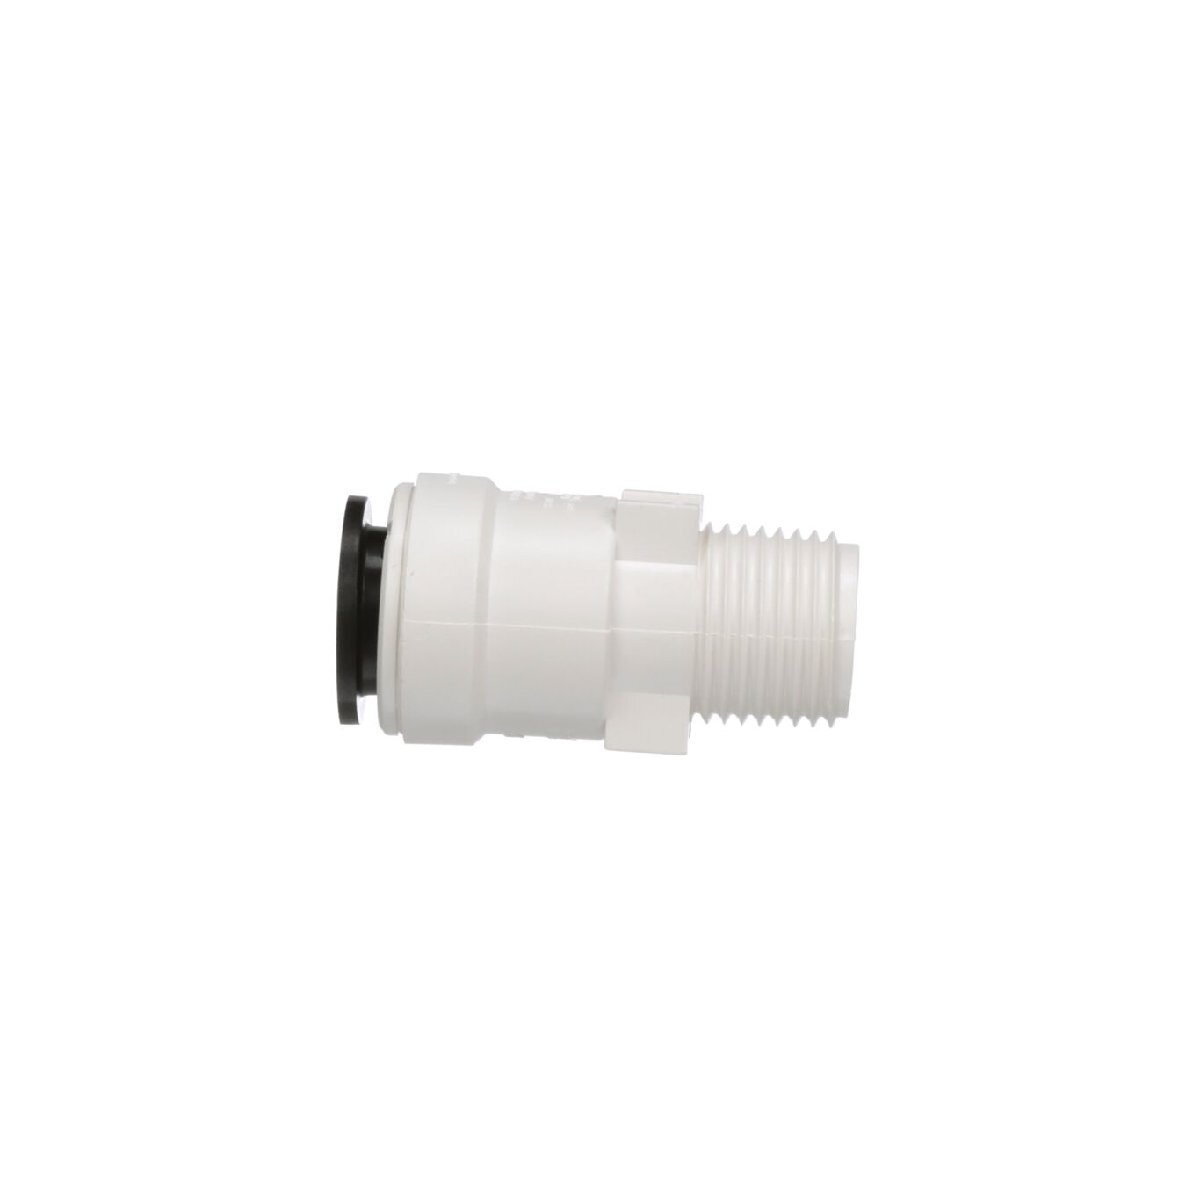 Aqualock 配管パーツ 1/2 IN CTS x 1/2 IN NPT Plastic Male Adapter【WATTS】アクアロック 9-3501-1008_画像2